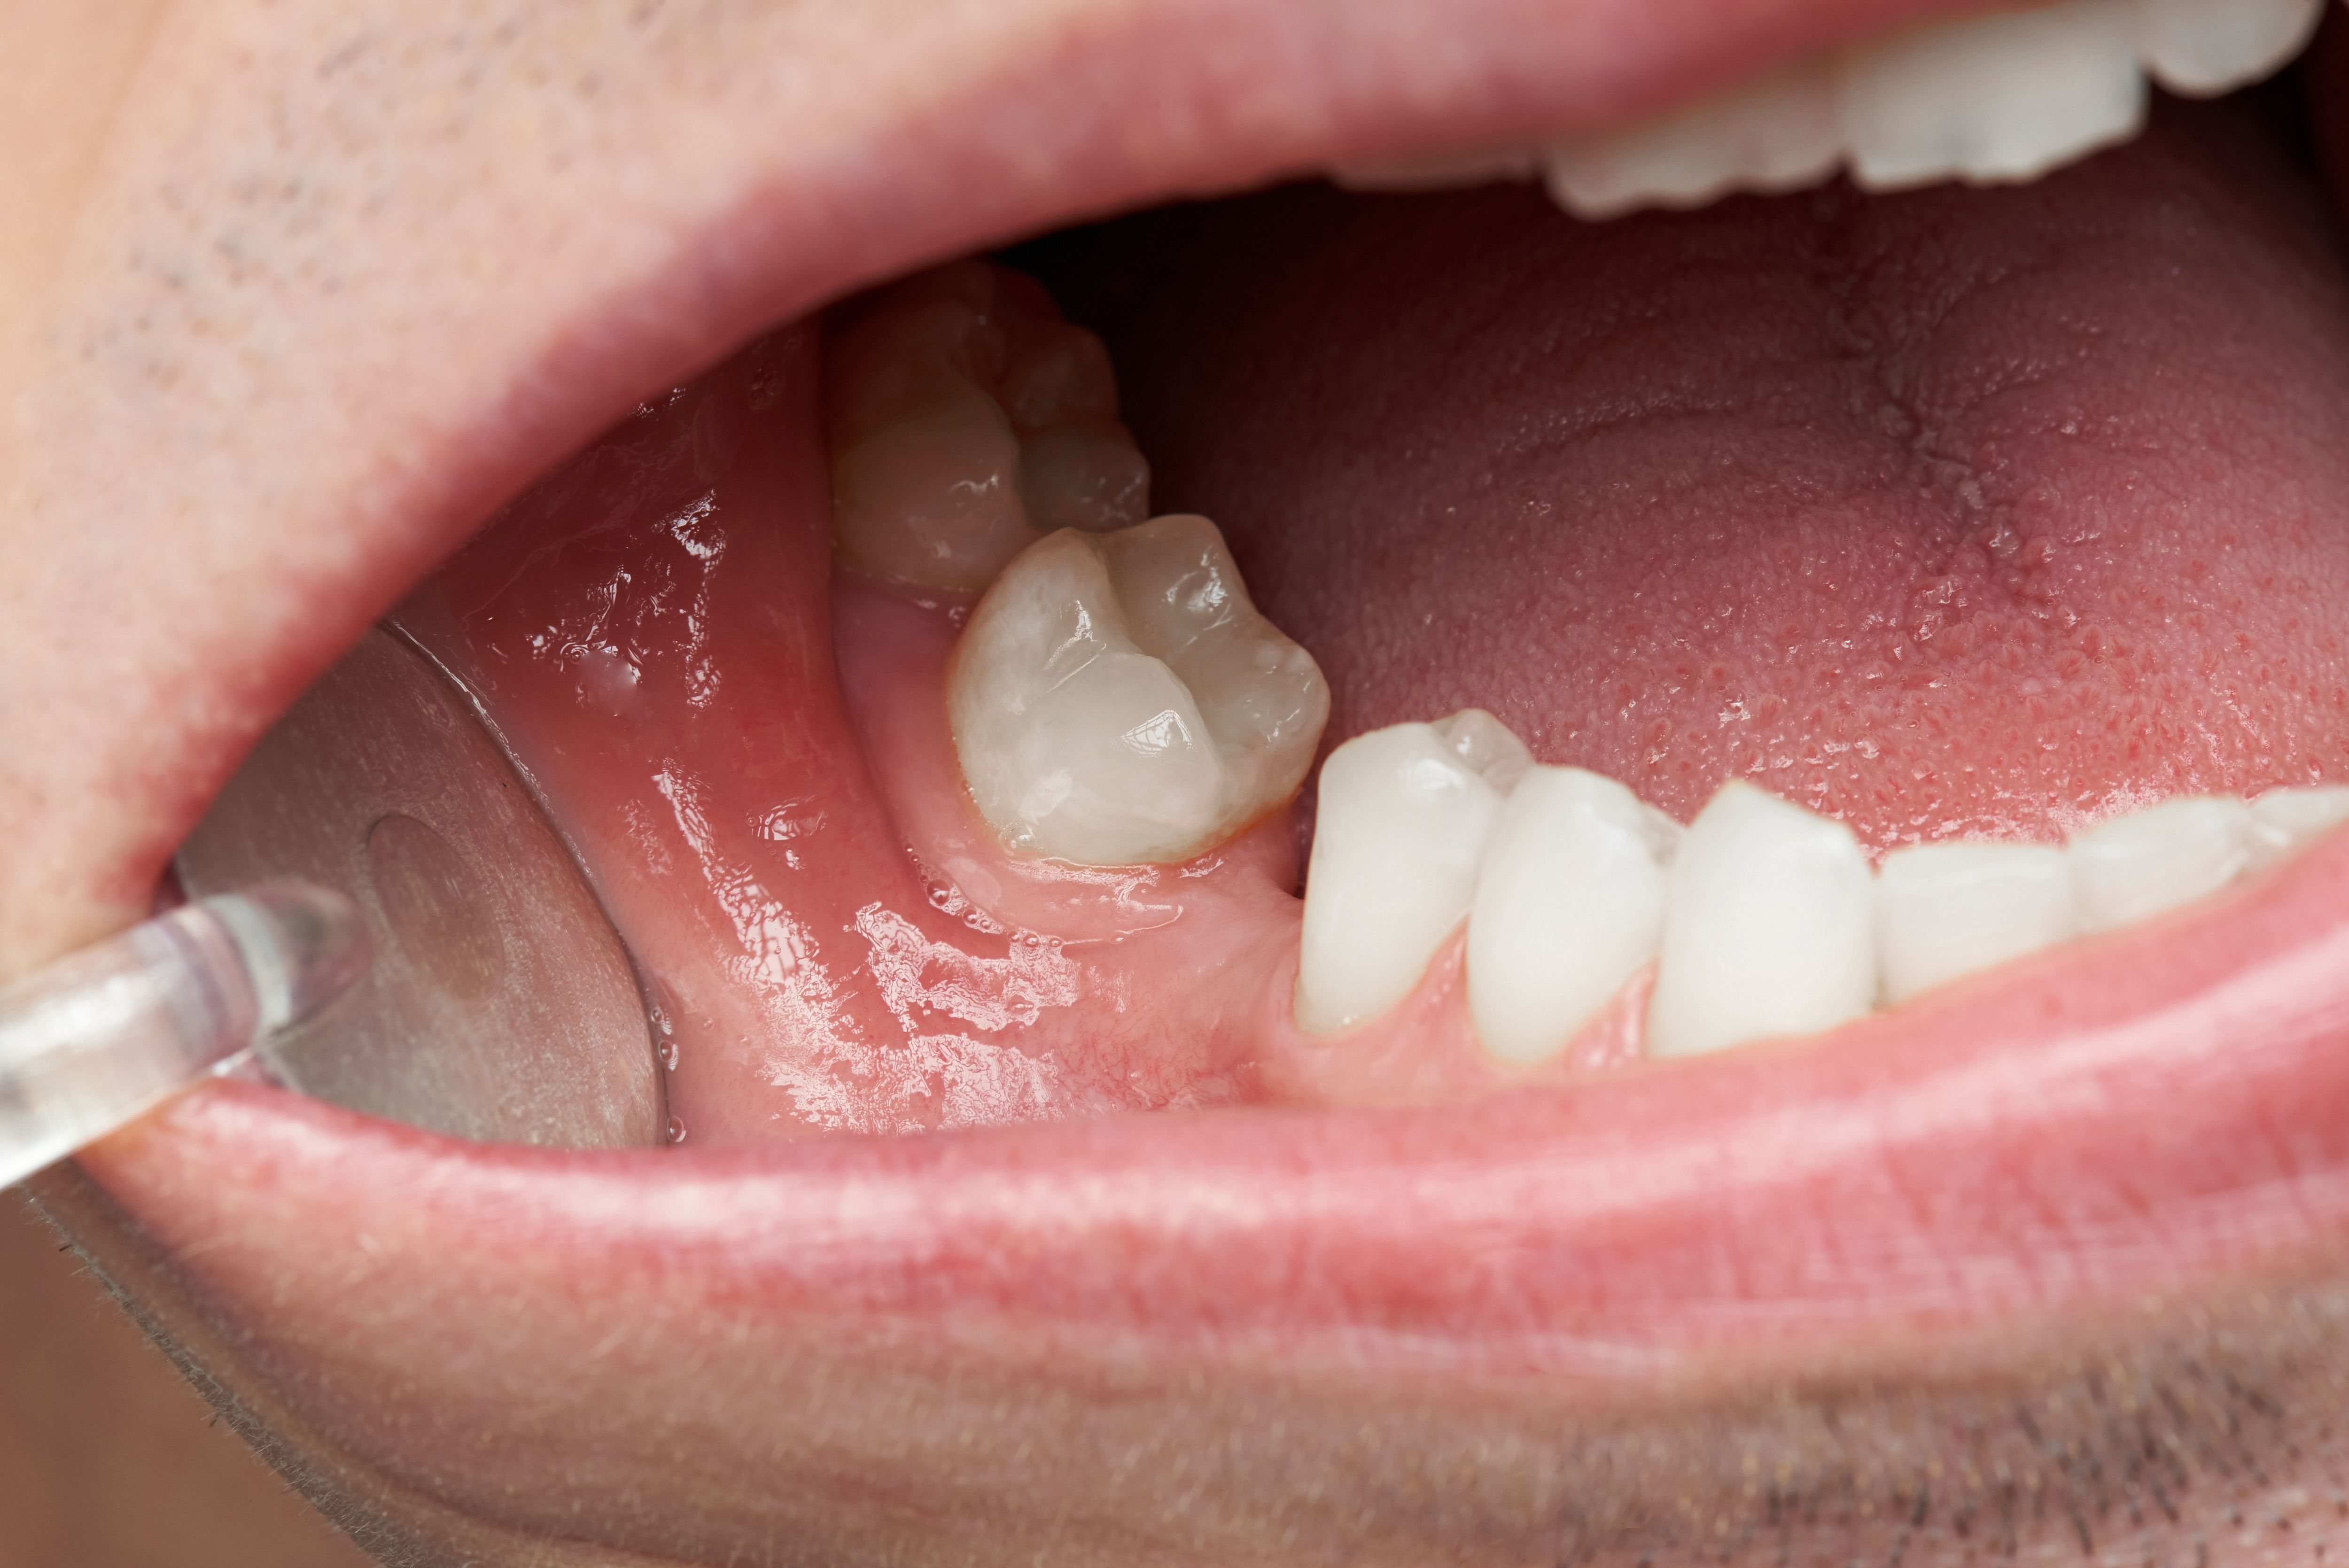 Human trials will focus on people who lack at least one molar. 